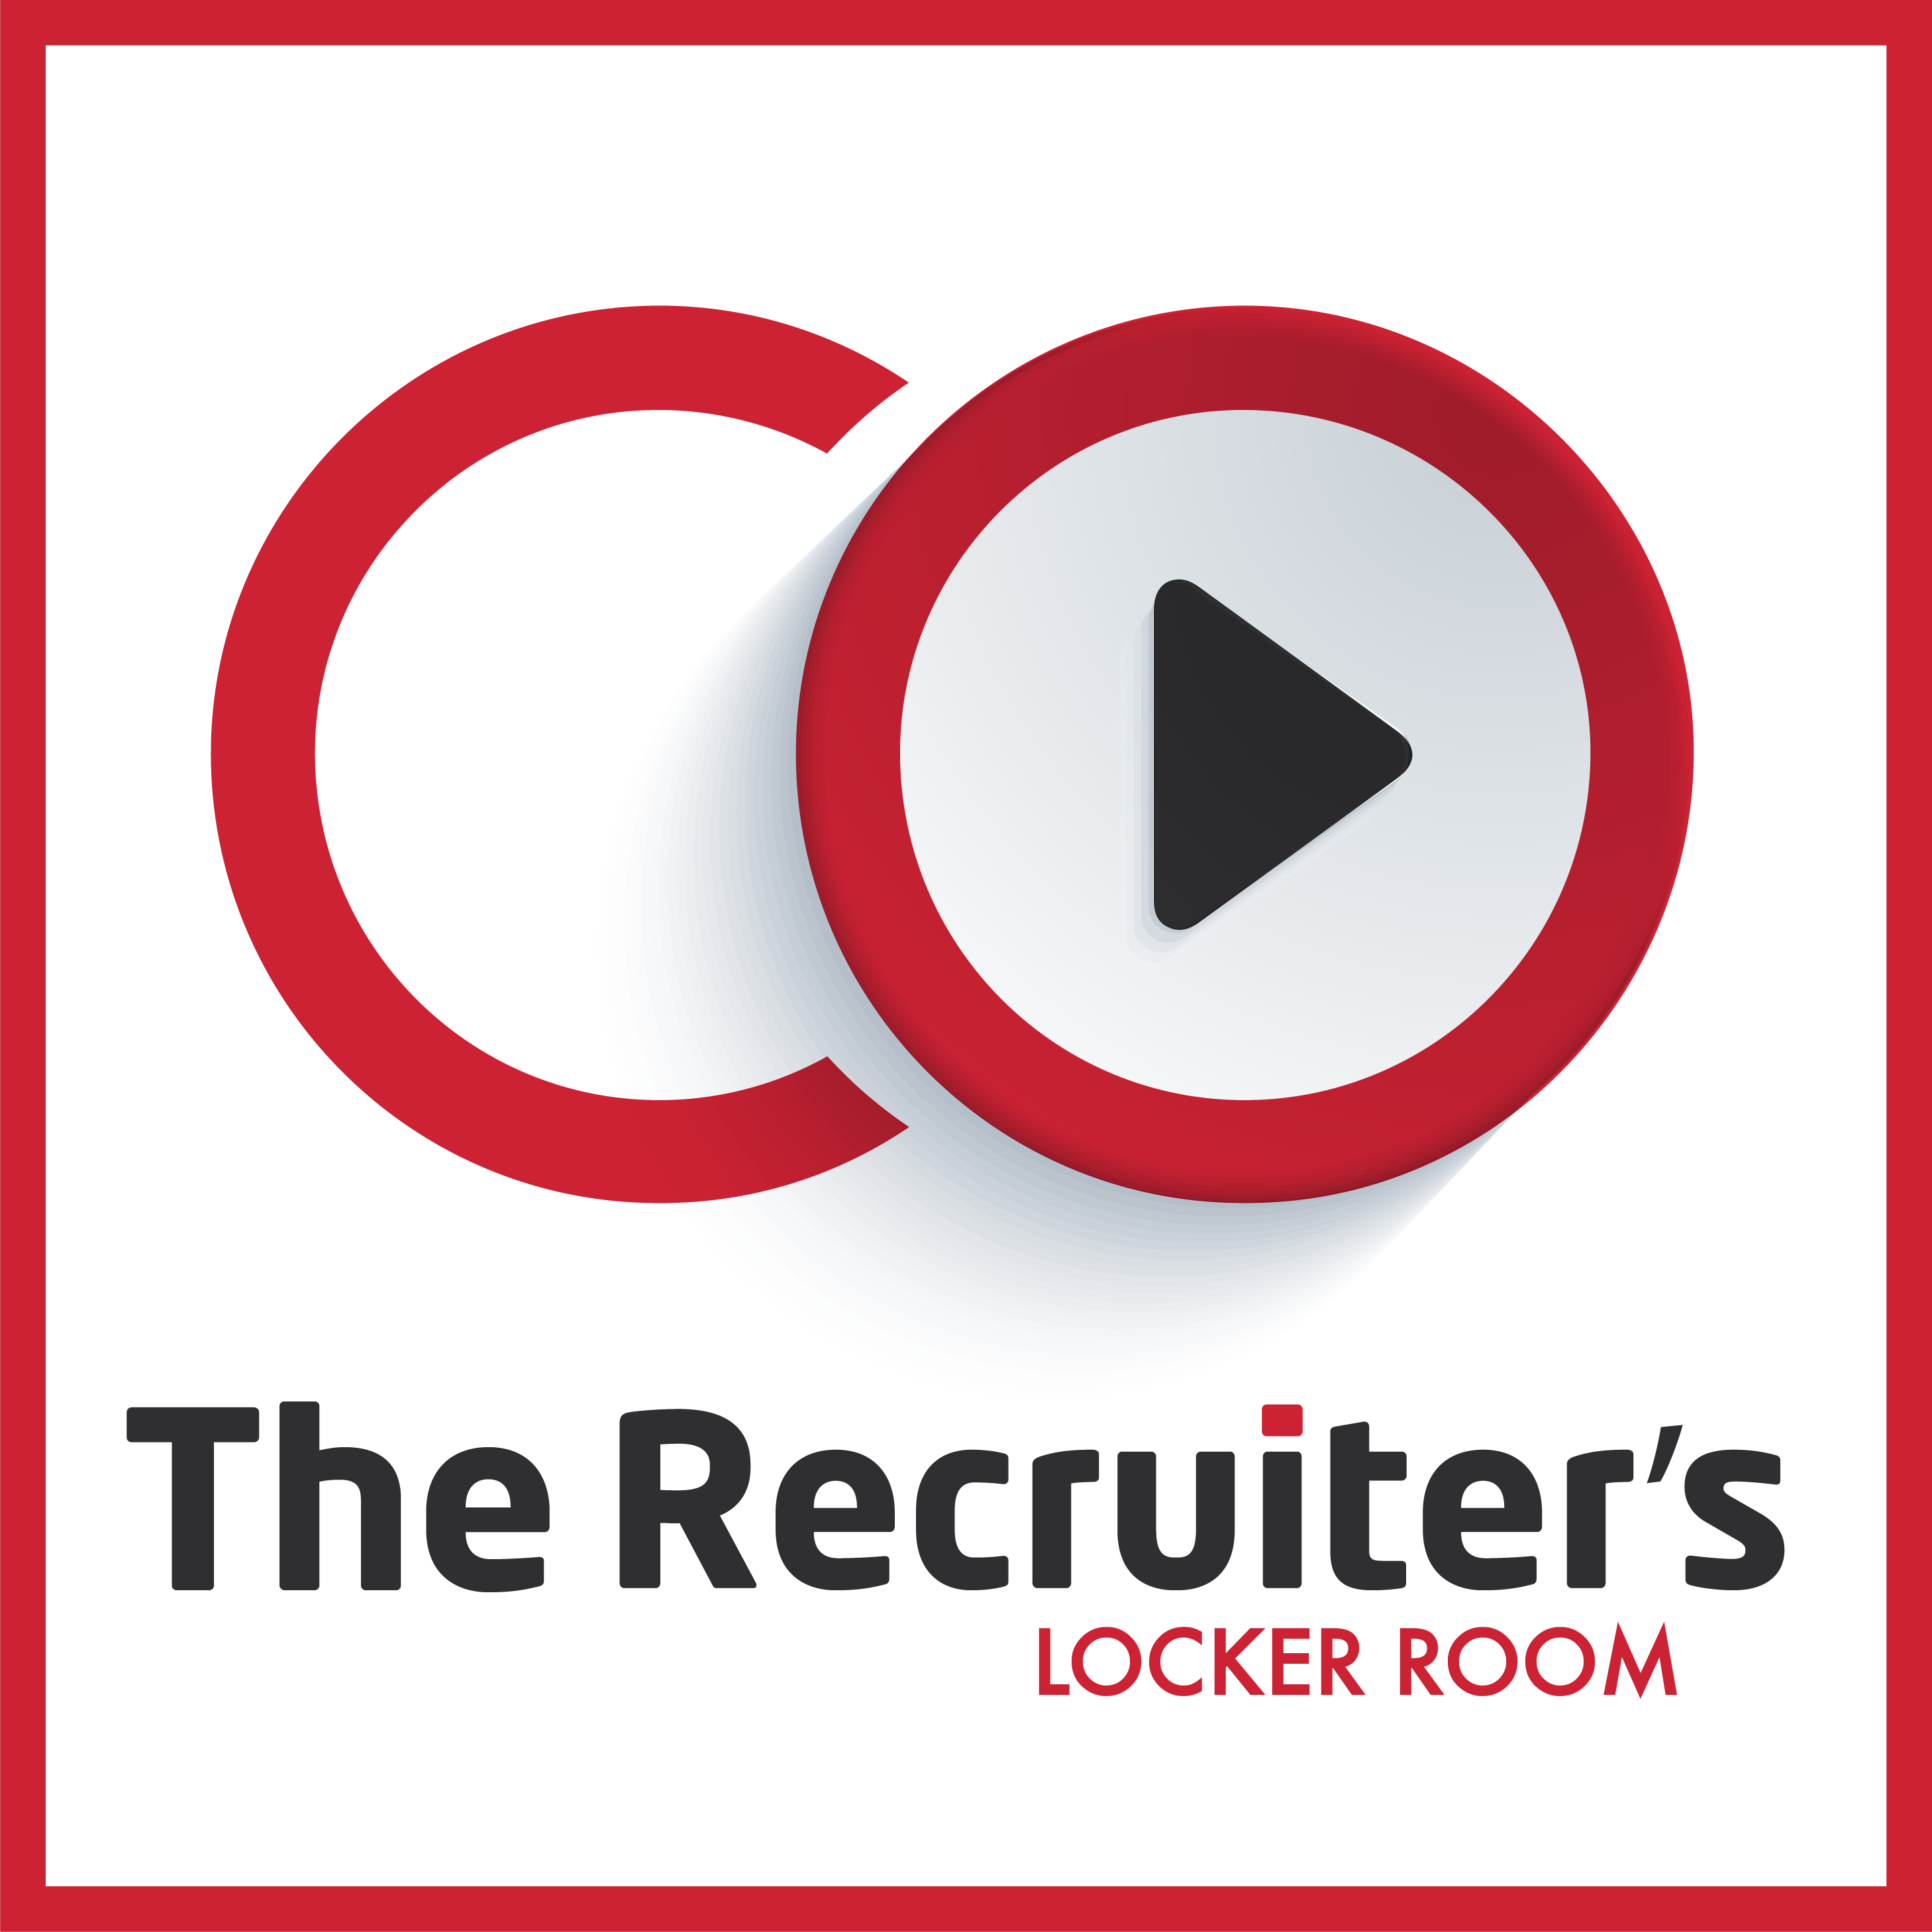 Recruiter's Locker Room by Recruiting in Motion